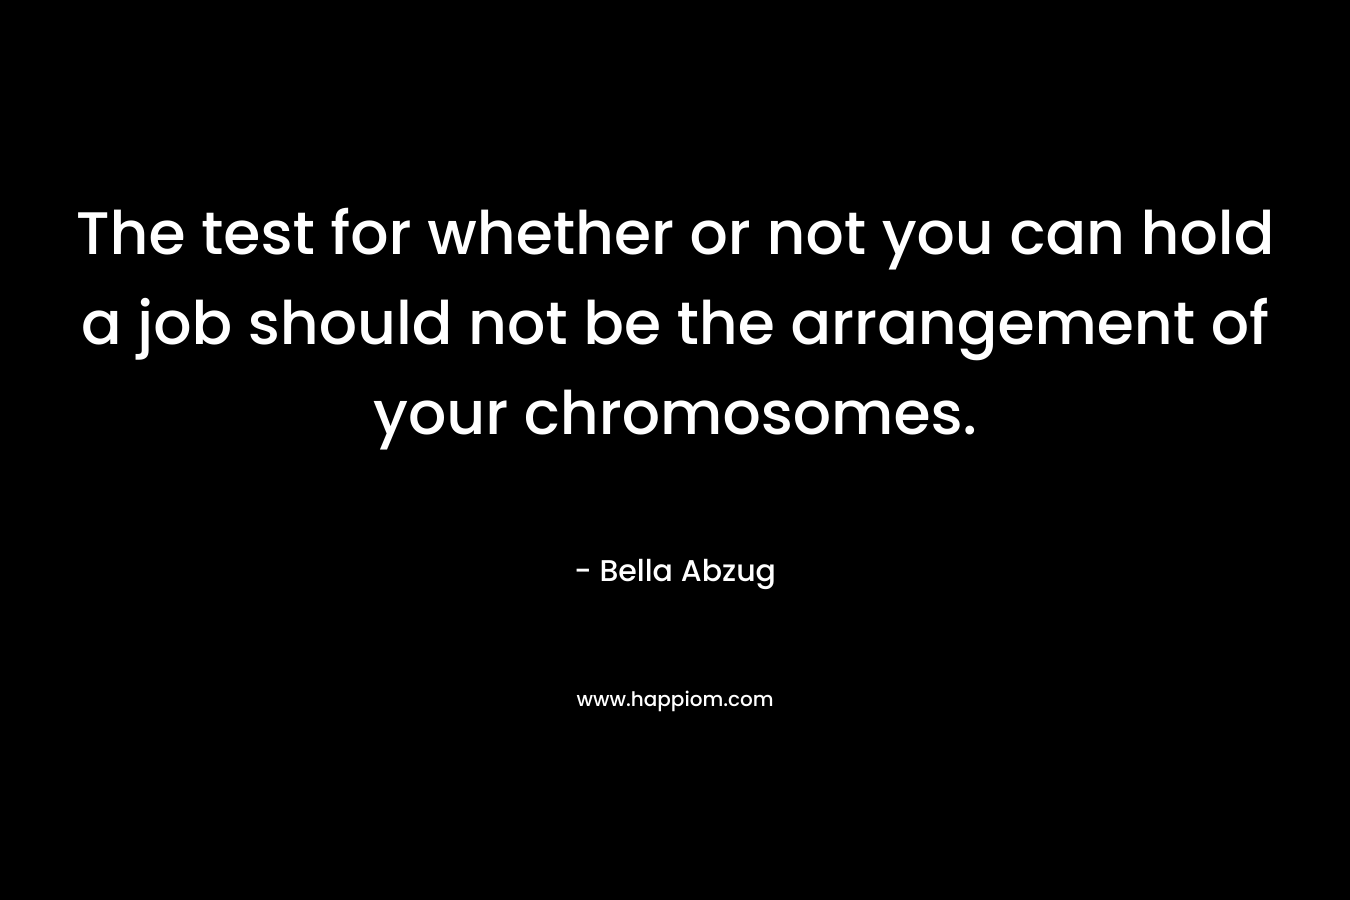 The test for whether or not you can hold a job should not be the arrangement of your chromosomes. – Bella Abzug